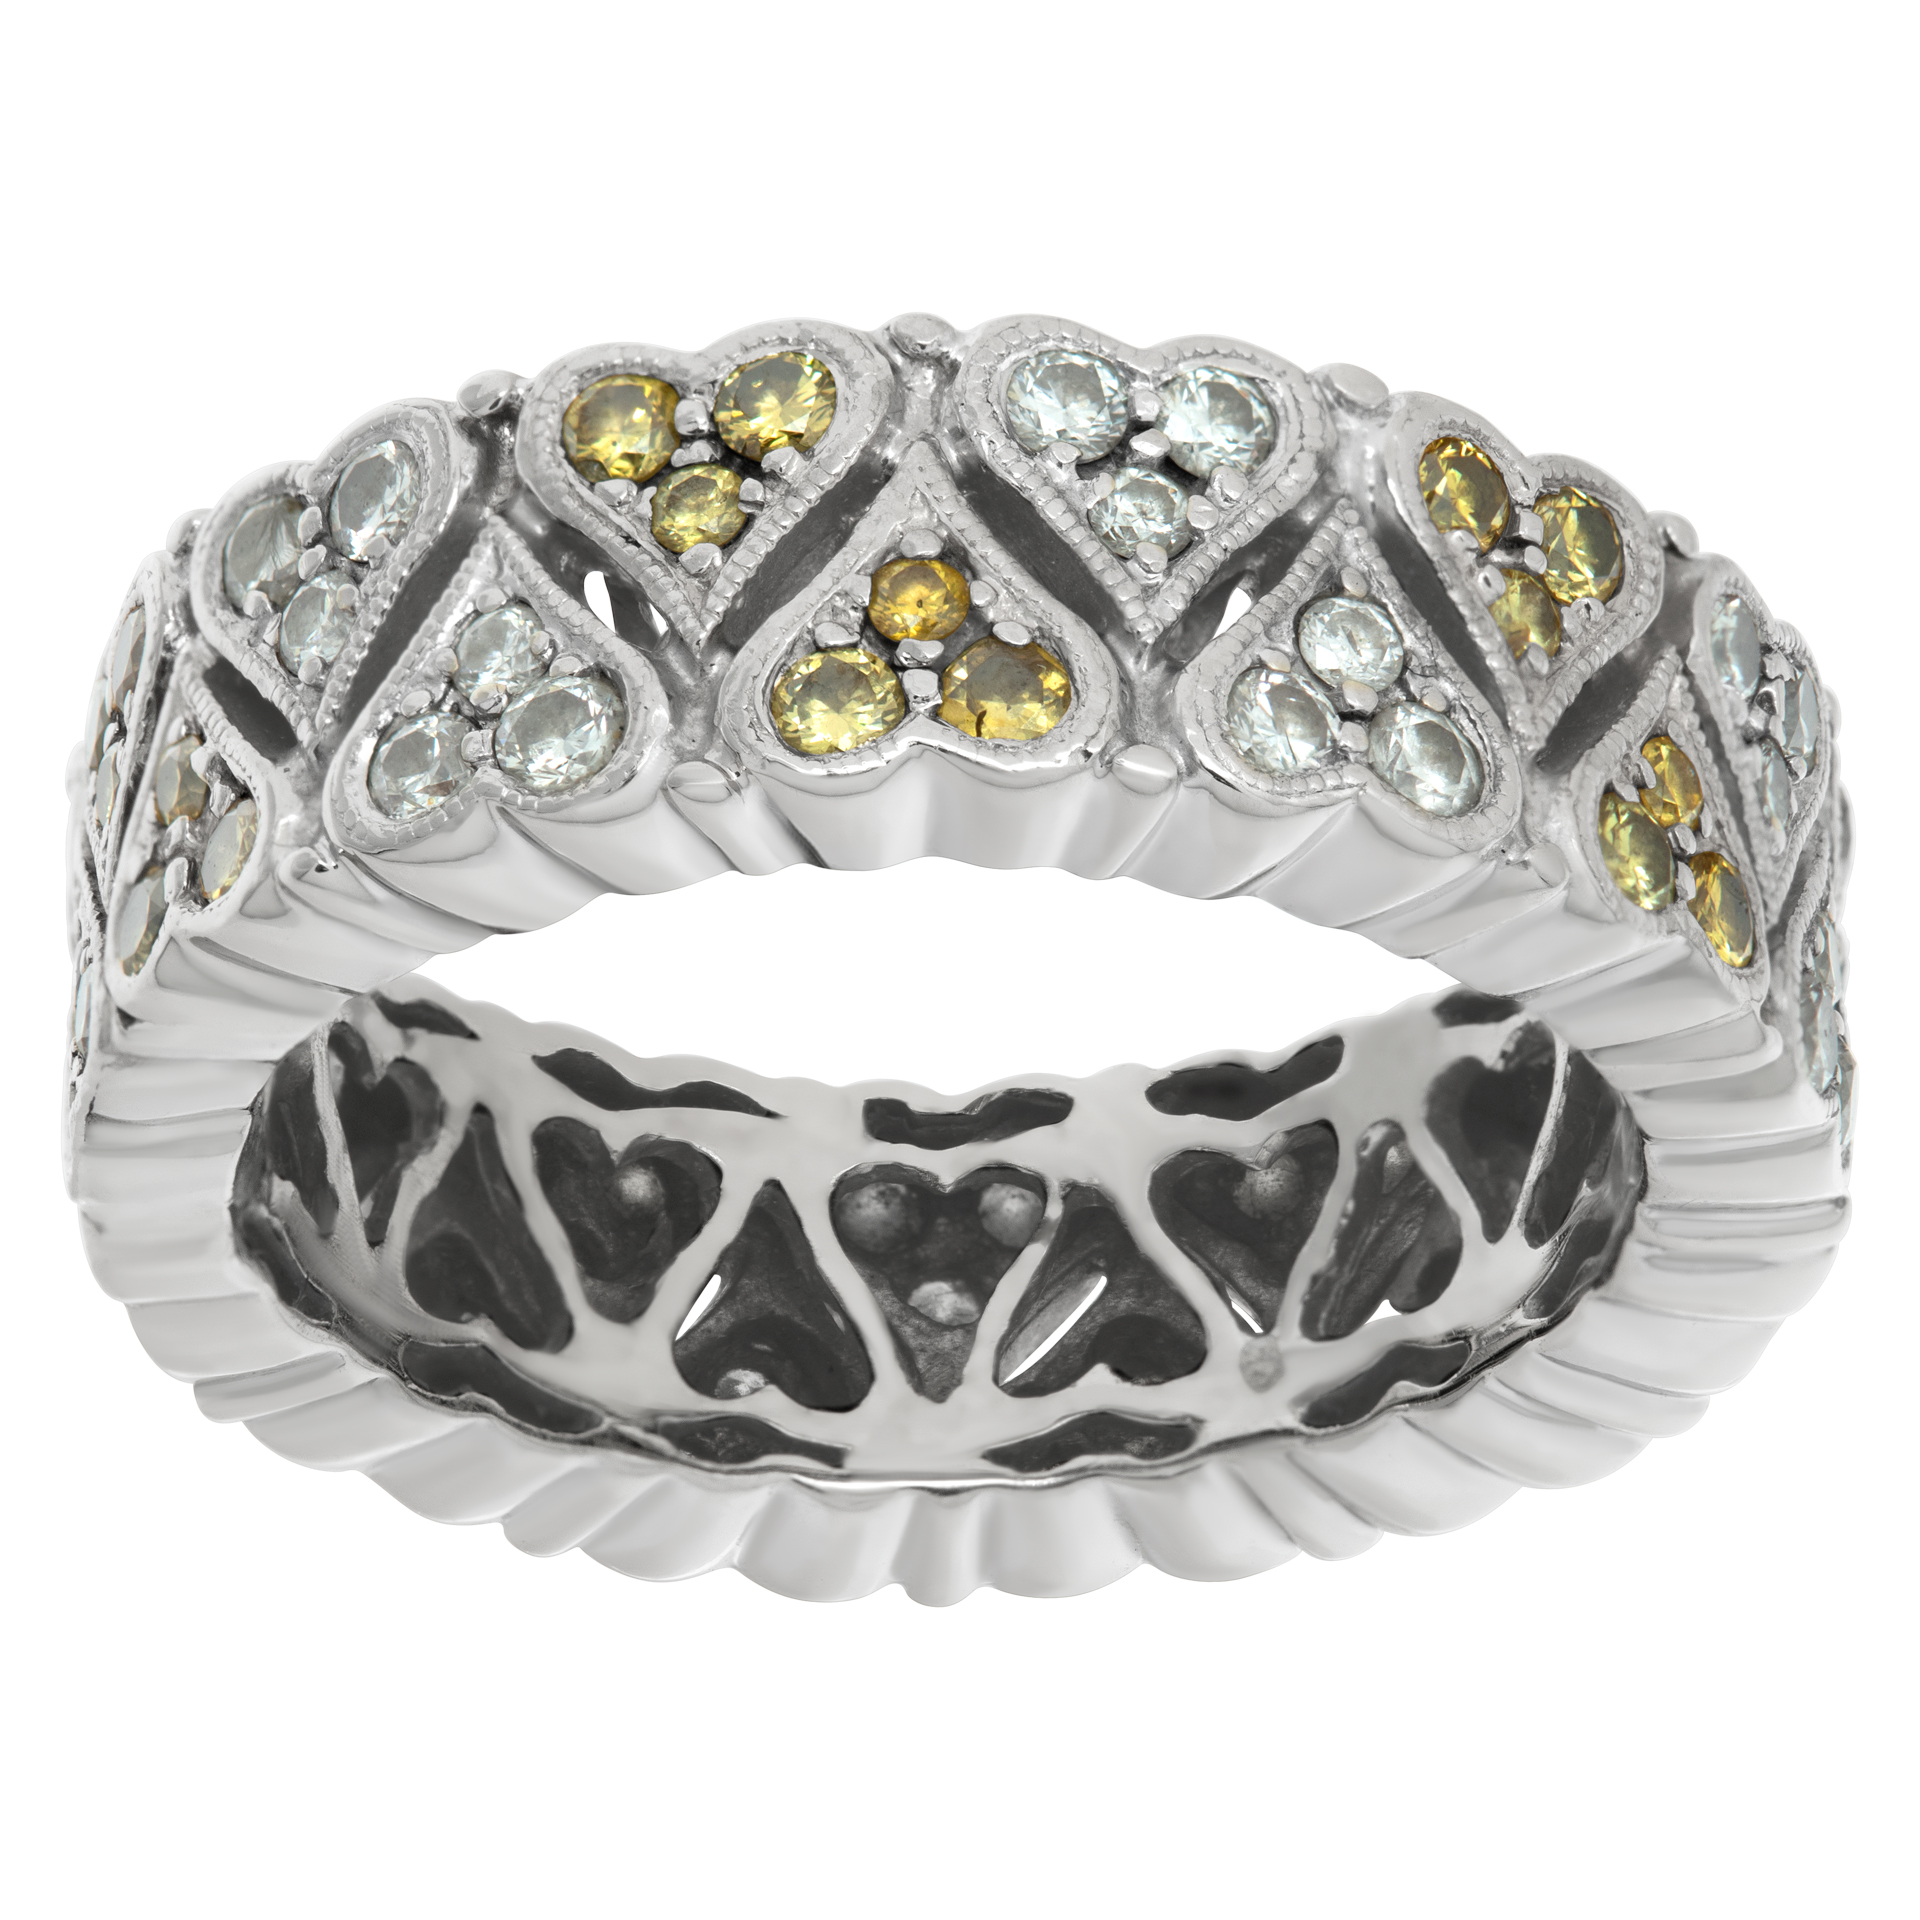 Diamond eternity band in 18k yellow and white gold. Total approx. weight: 1.25 carats. Size 7.